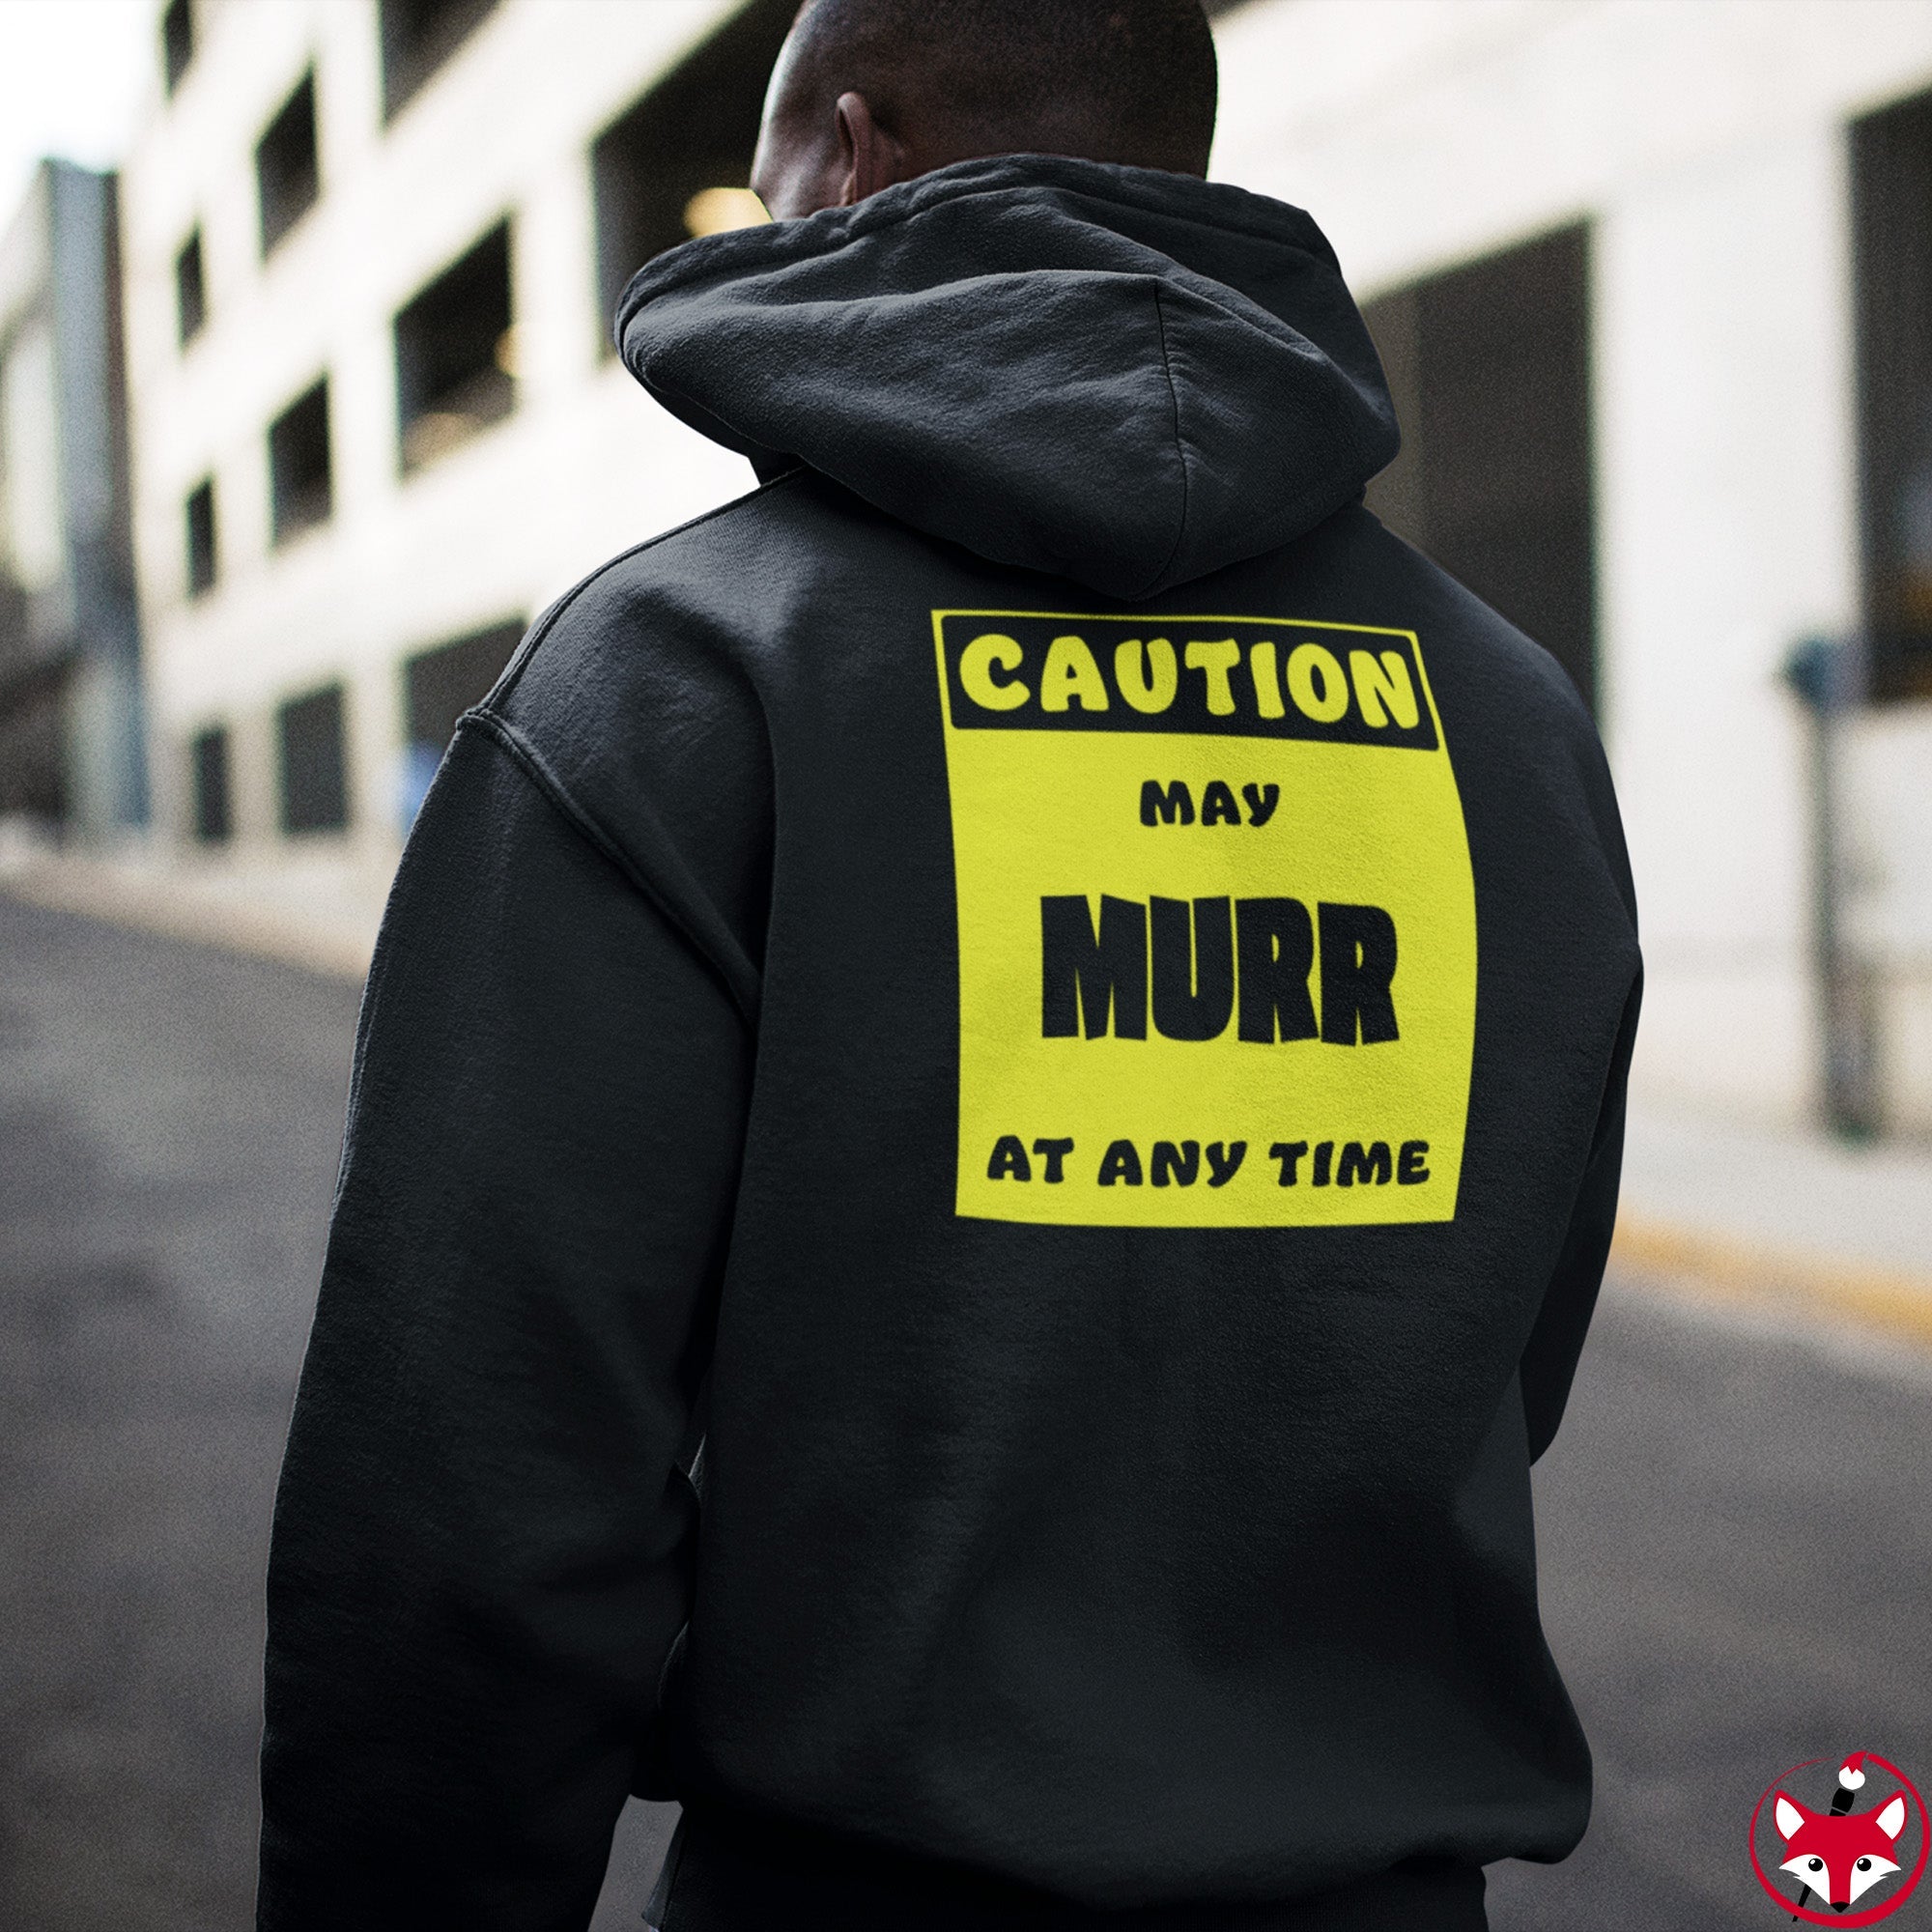 CAUTION! May MURR at any time! - Hoodie Hoodie AFLT-Whootorca 